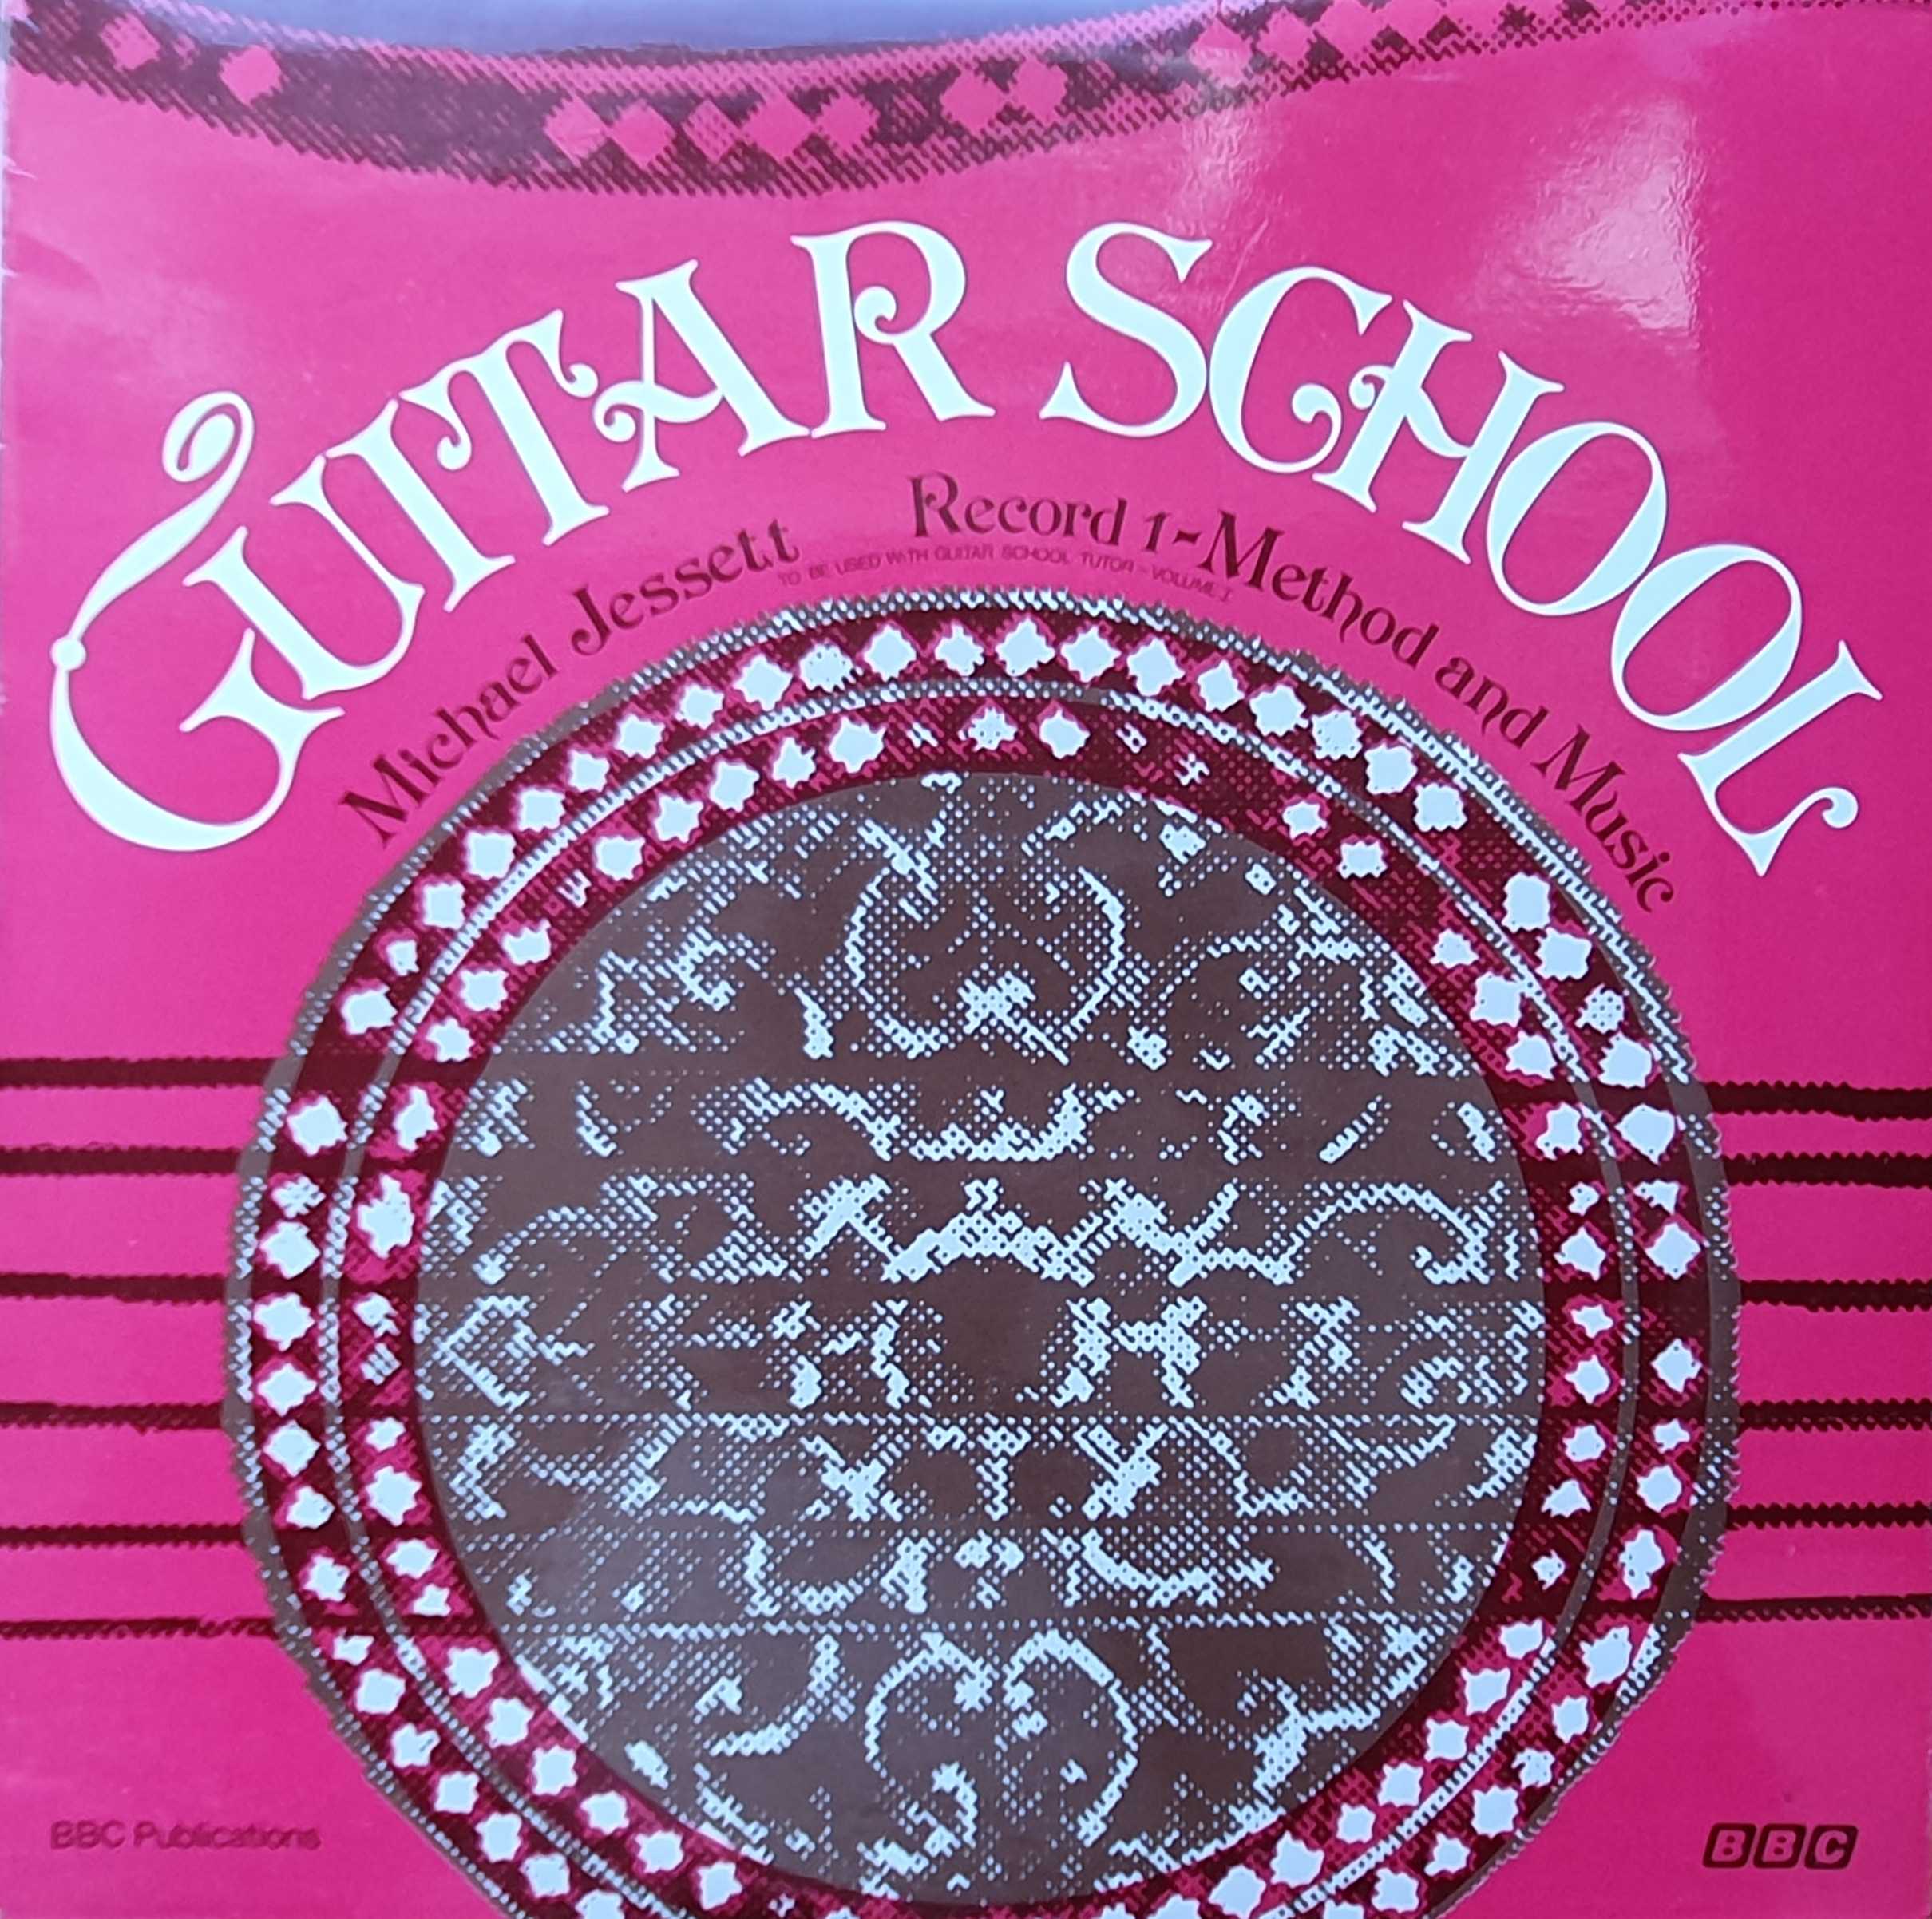 Picture of OP 201/202 Guitar school - Record 1 - Method and music by artist Michael Jessett from the BBC albums - Records and Tapes library